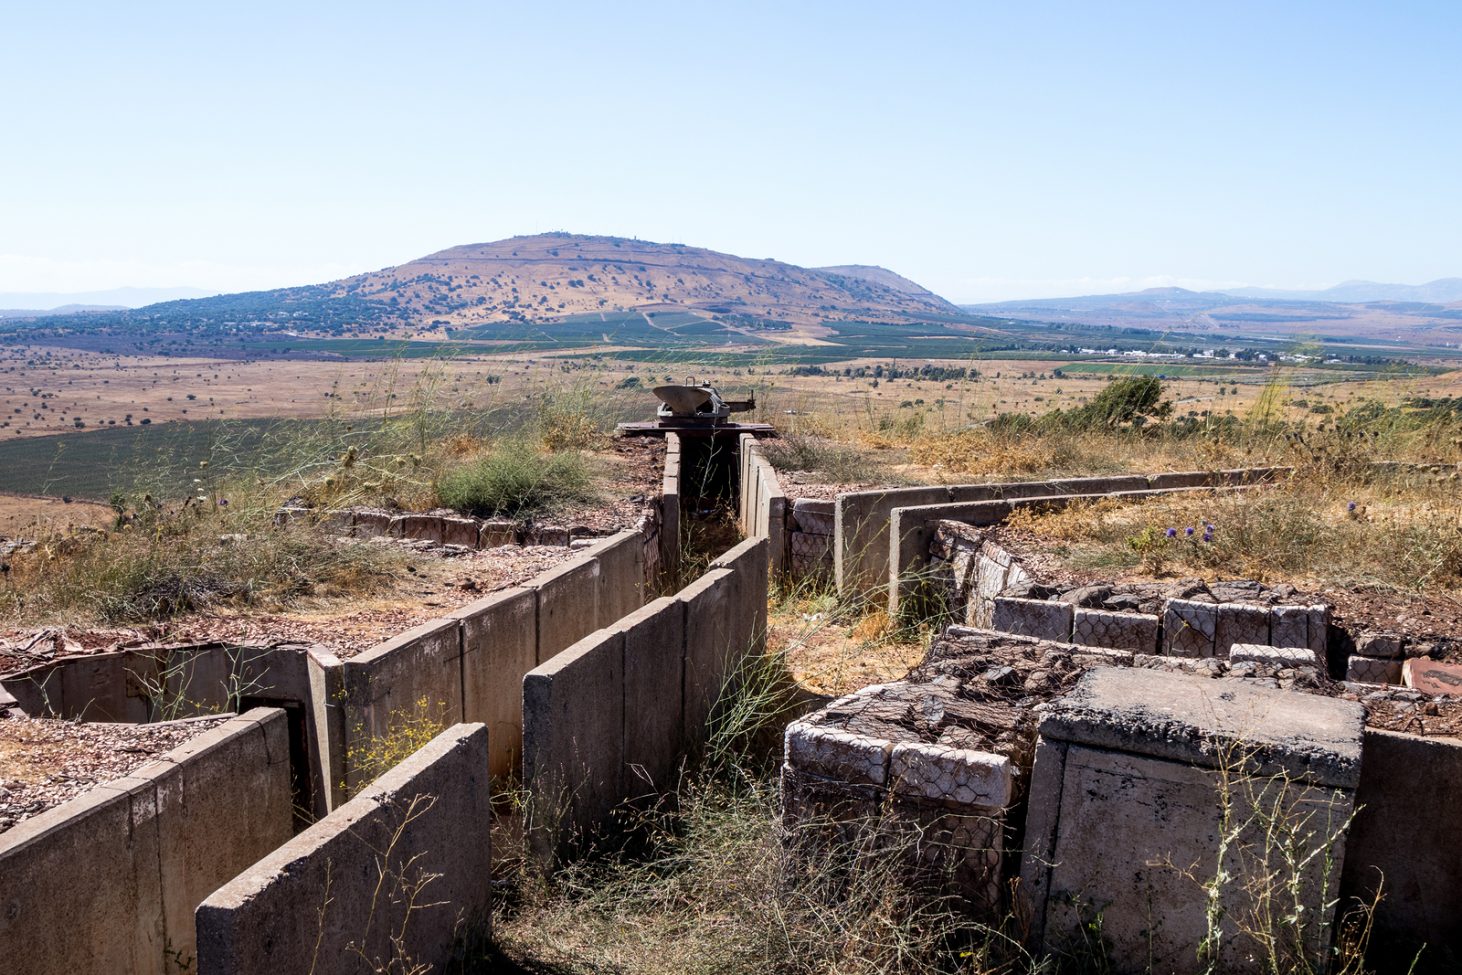 Old abandoned trenches from the time of the Yom Kippur War on the Golan Heights near the border with Syria in Israel